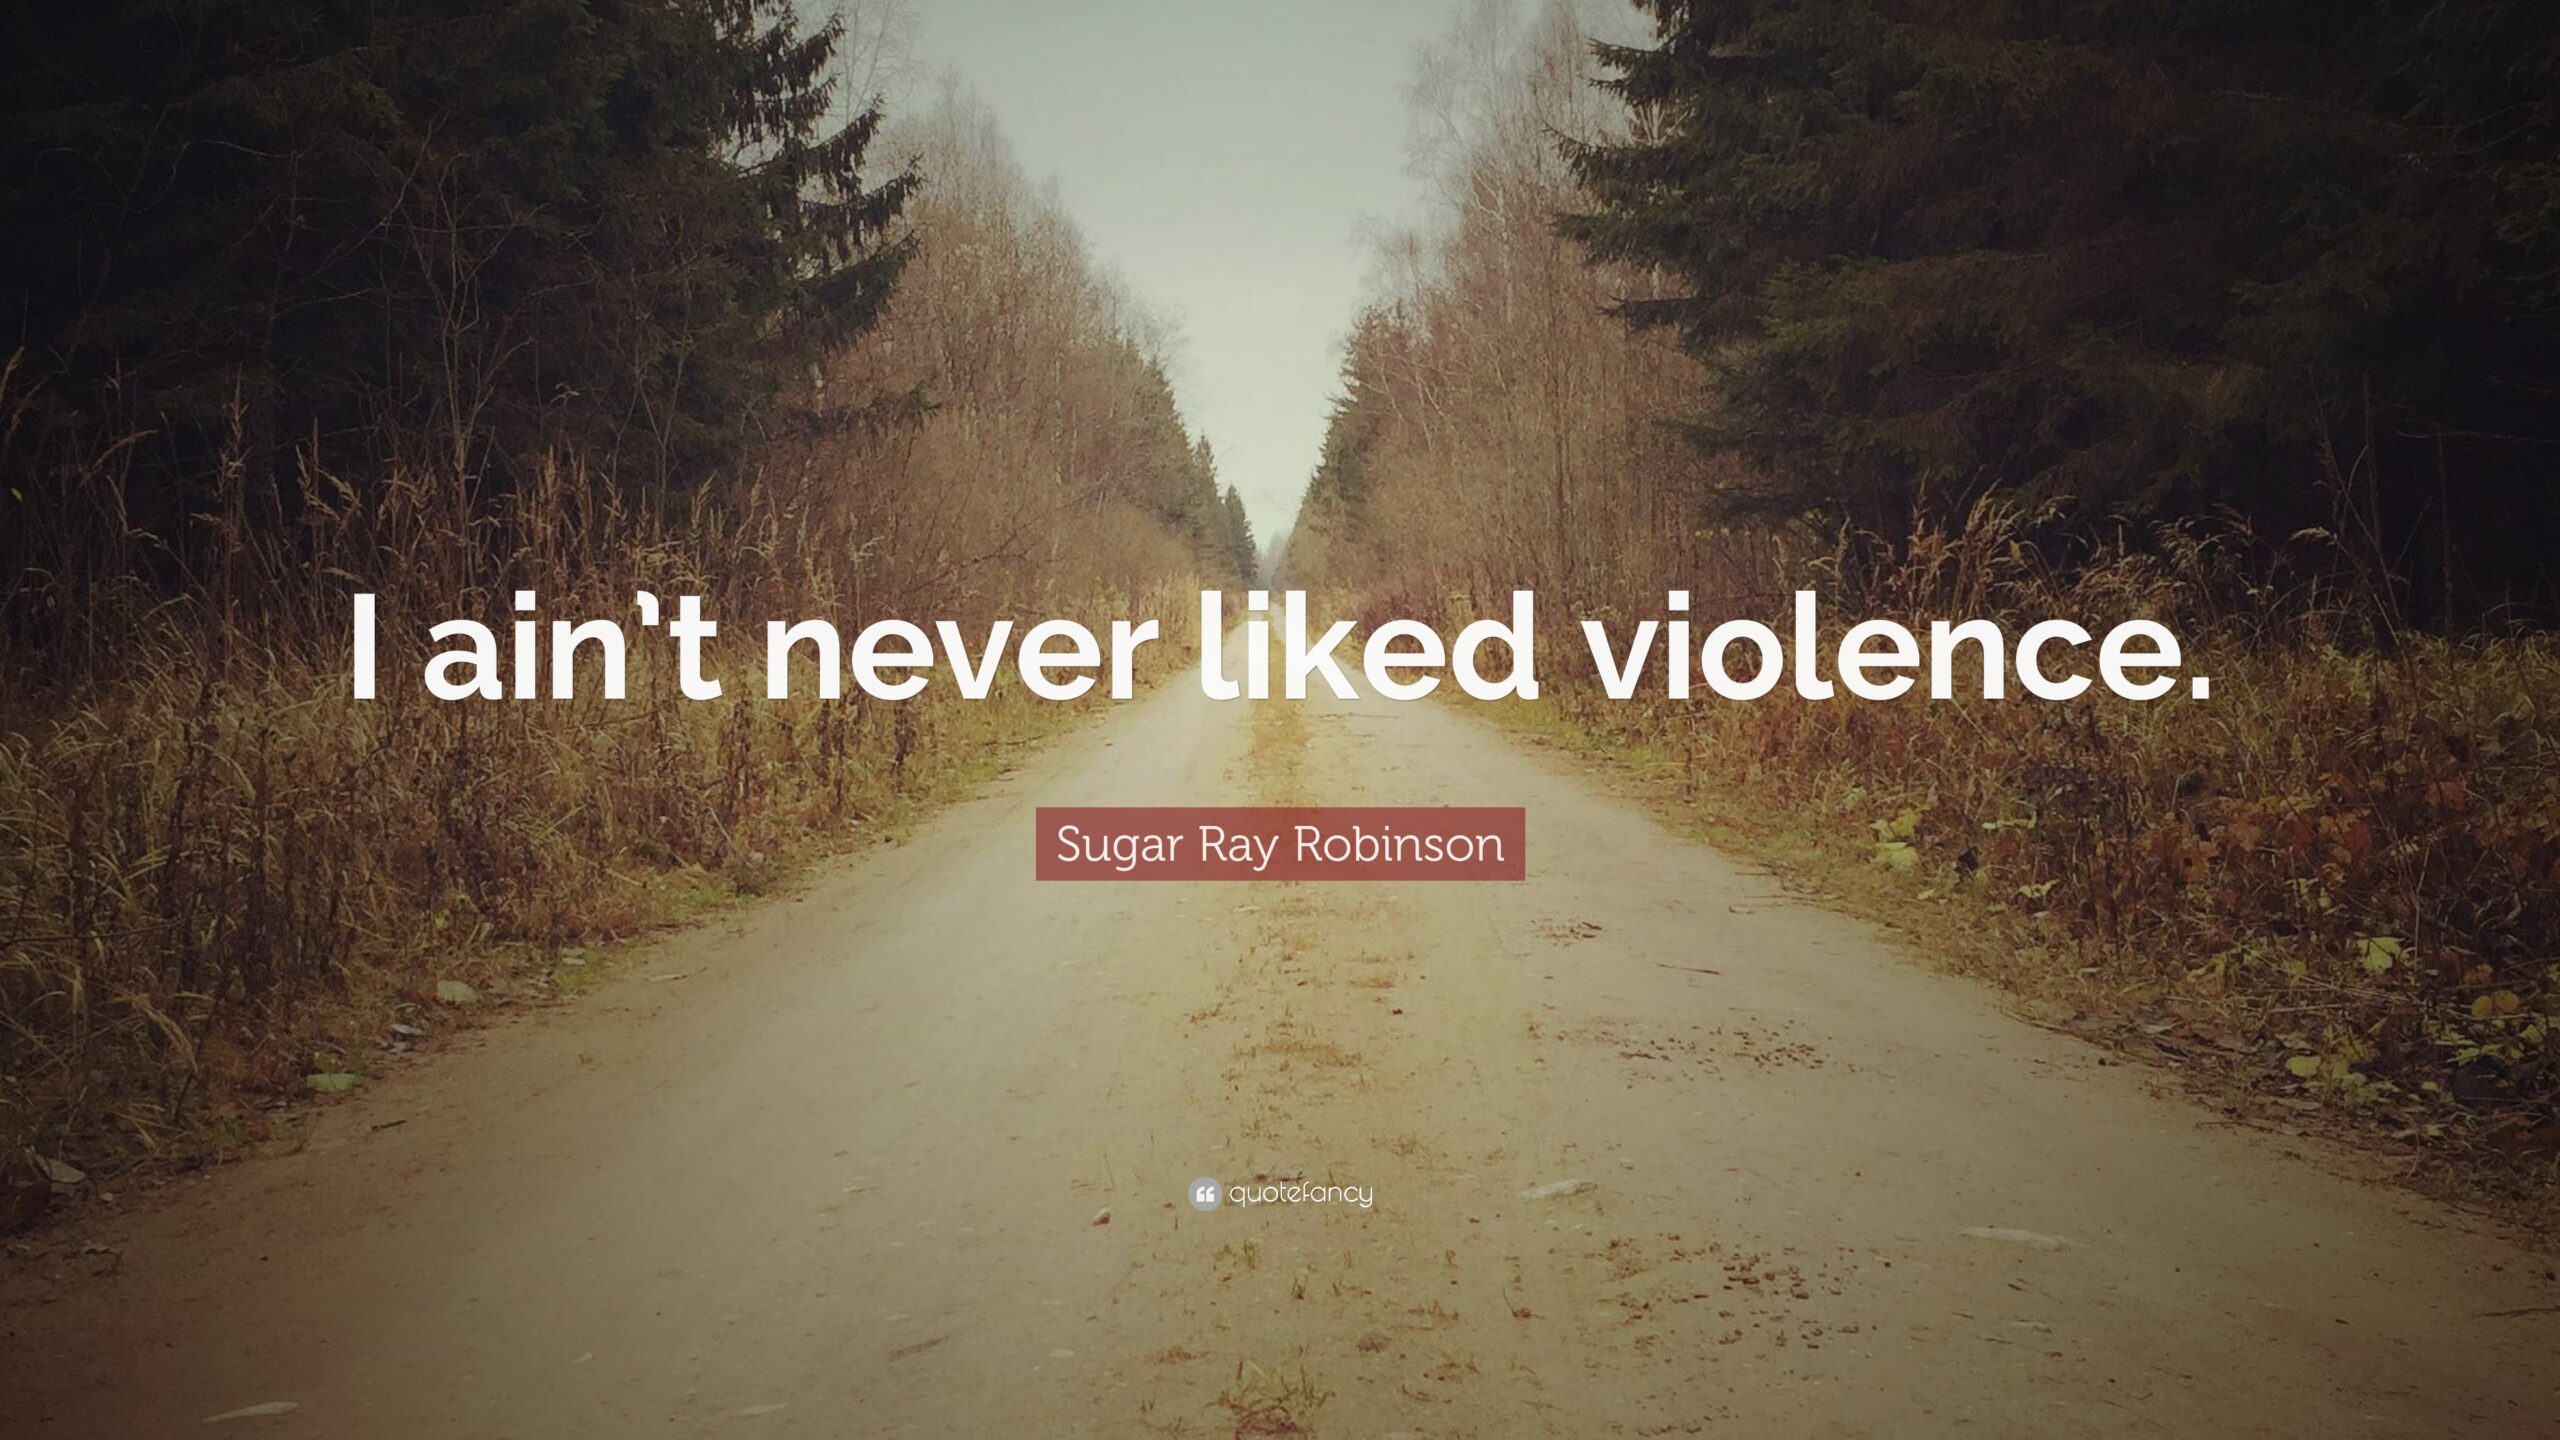 Sugar Ray Robinson Quote “I ain’t never liked violence”